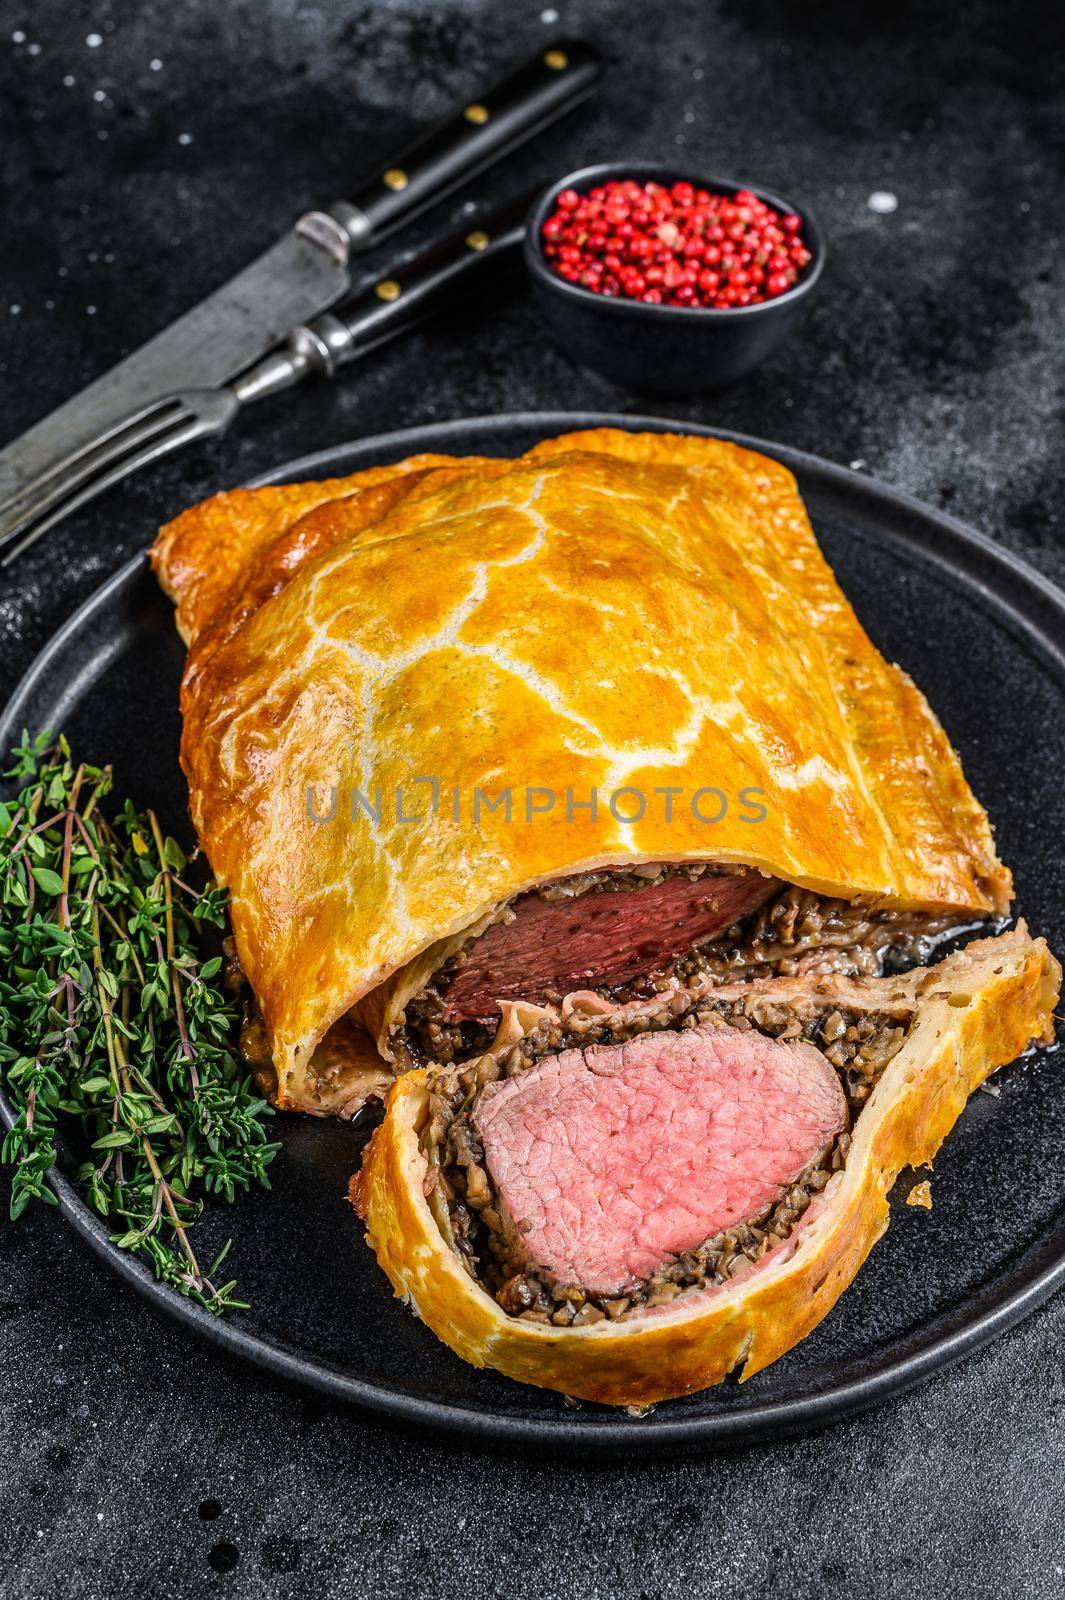 Beef Wellington classic steak dish with tenderloin meat on a plate. Black background. Top view by Composter